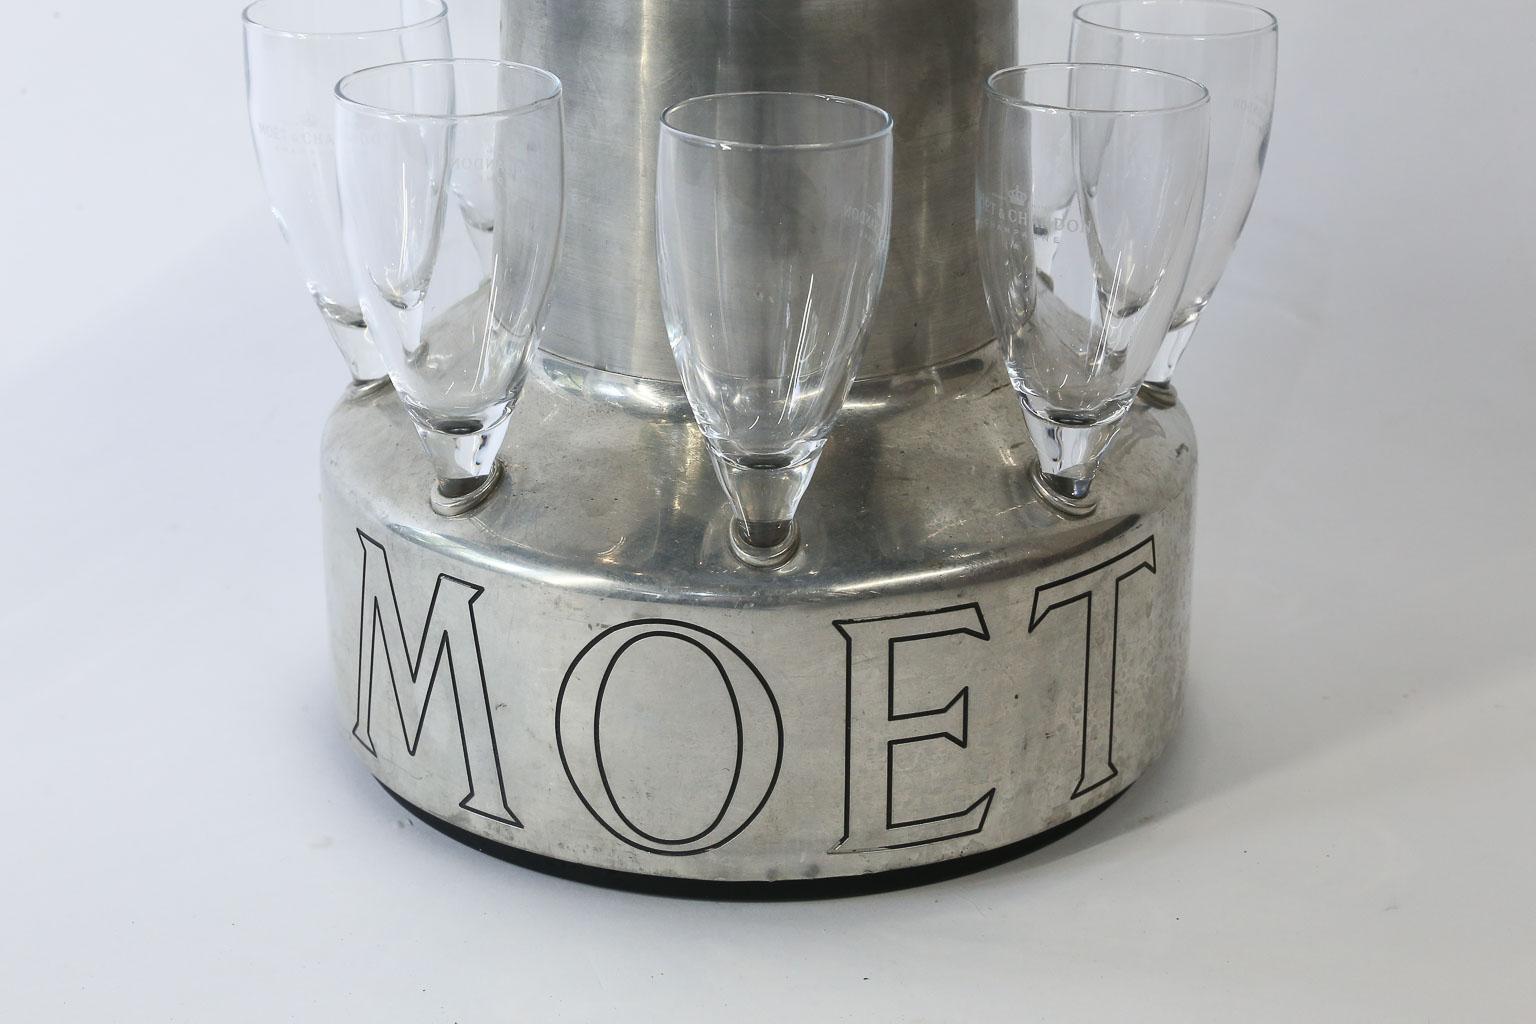 What a find and what a conversation piece! This vintage Moet Chandon champagne cooler with glasses is a stunning item and worthy of a prime location in your home bar. The cooler comes complete with 8 glasses, all embossed with the Moet Chandon logo,